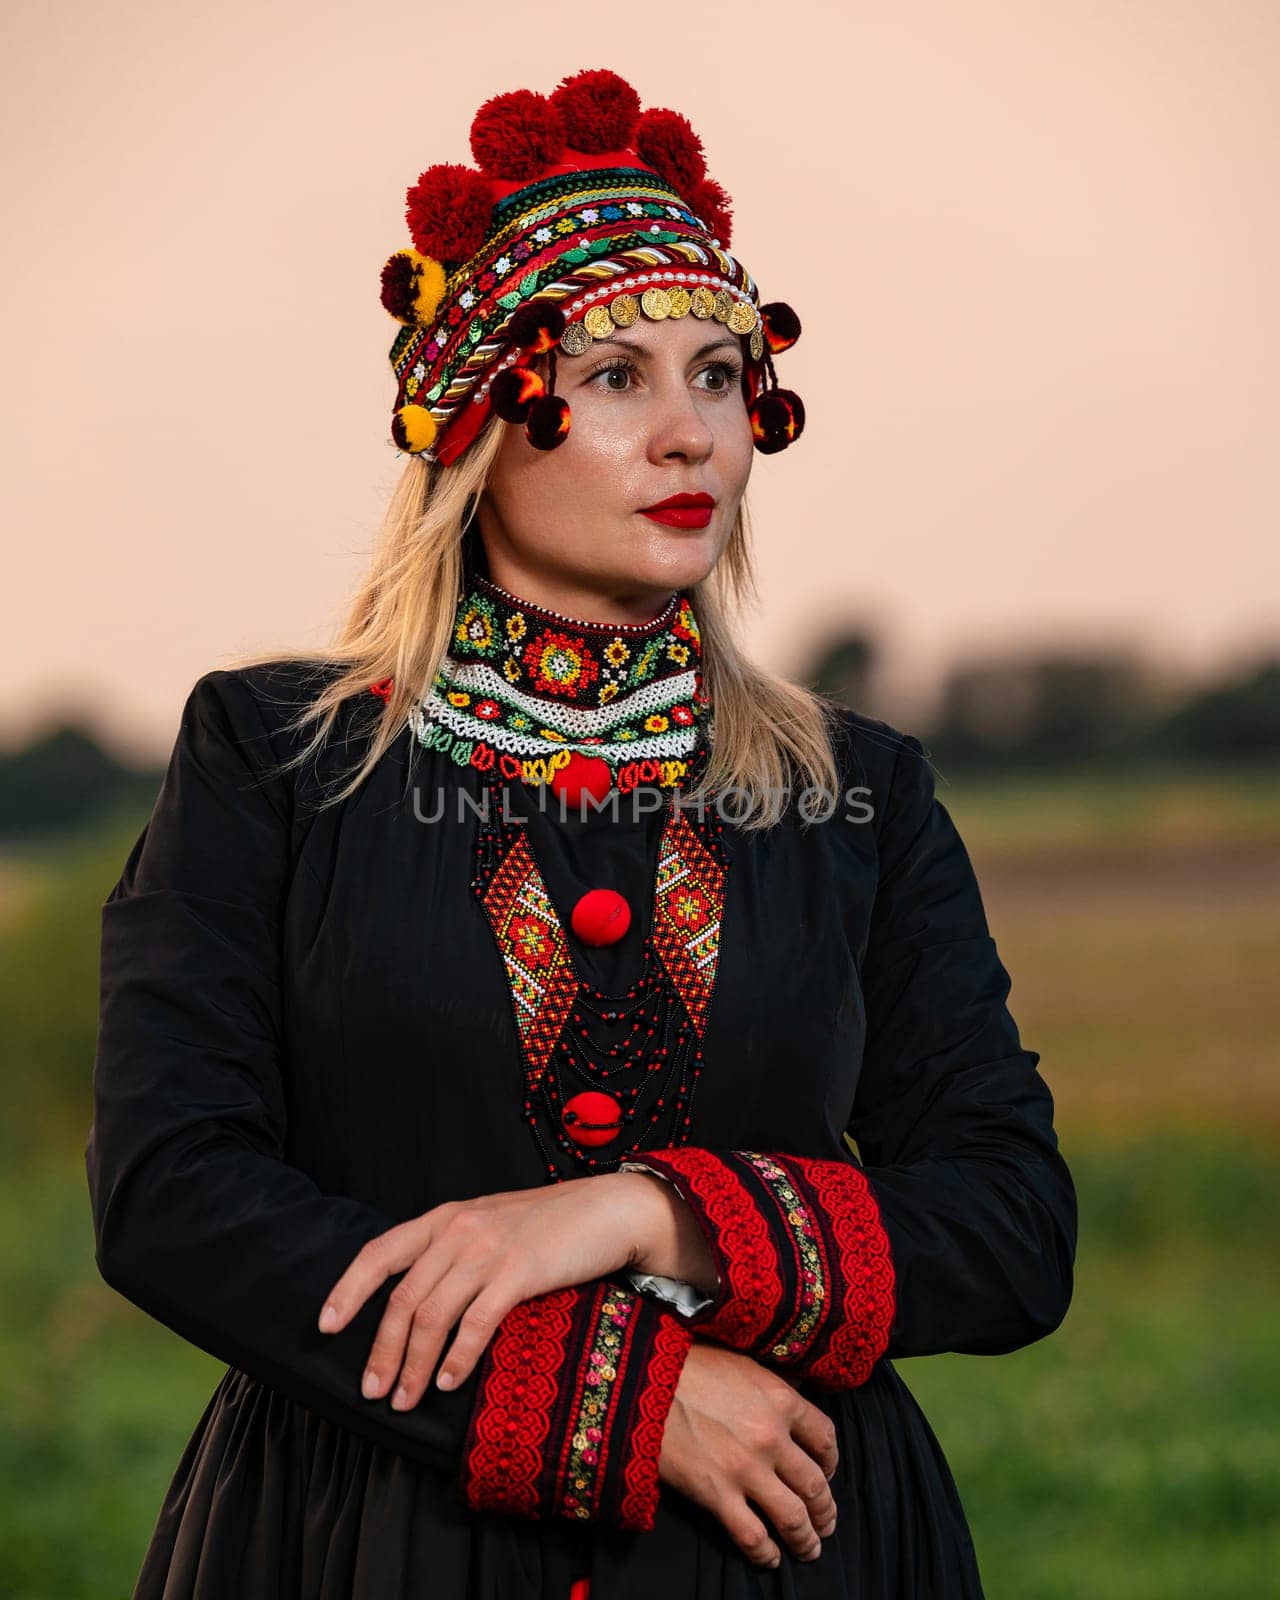 A girl in a chelsea headdress and a black dress decorated with red embroidery on the background of a field and sky. by Niko_Cingaryuk